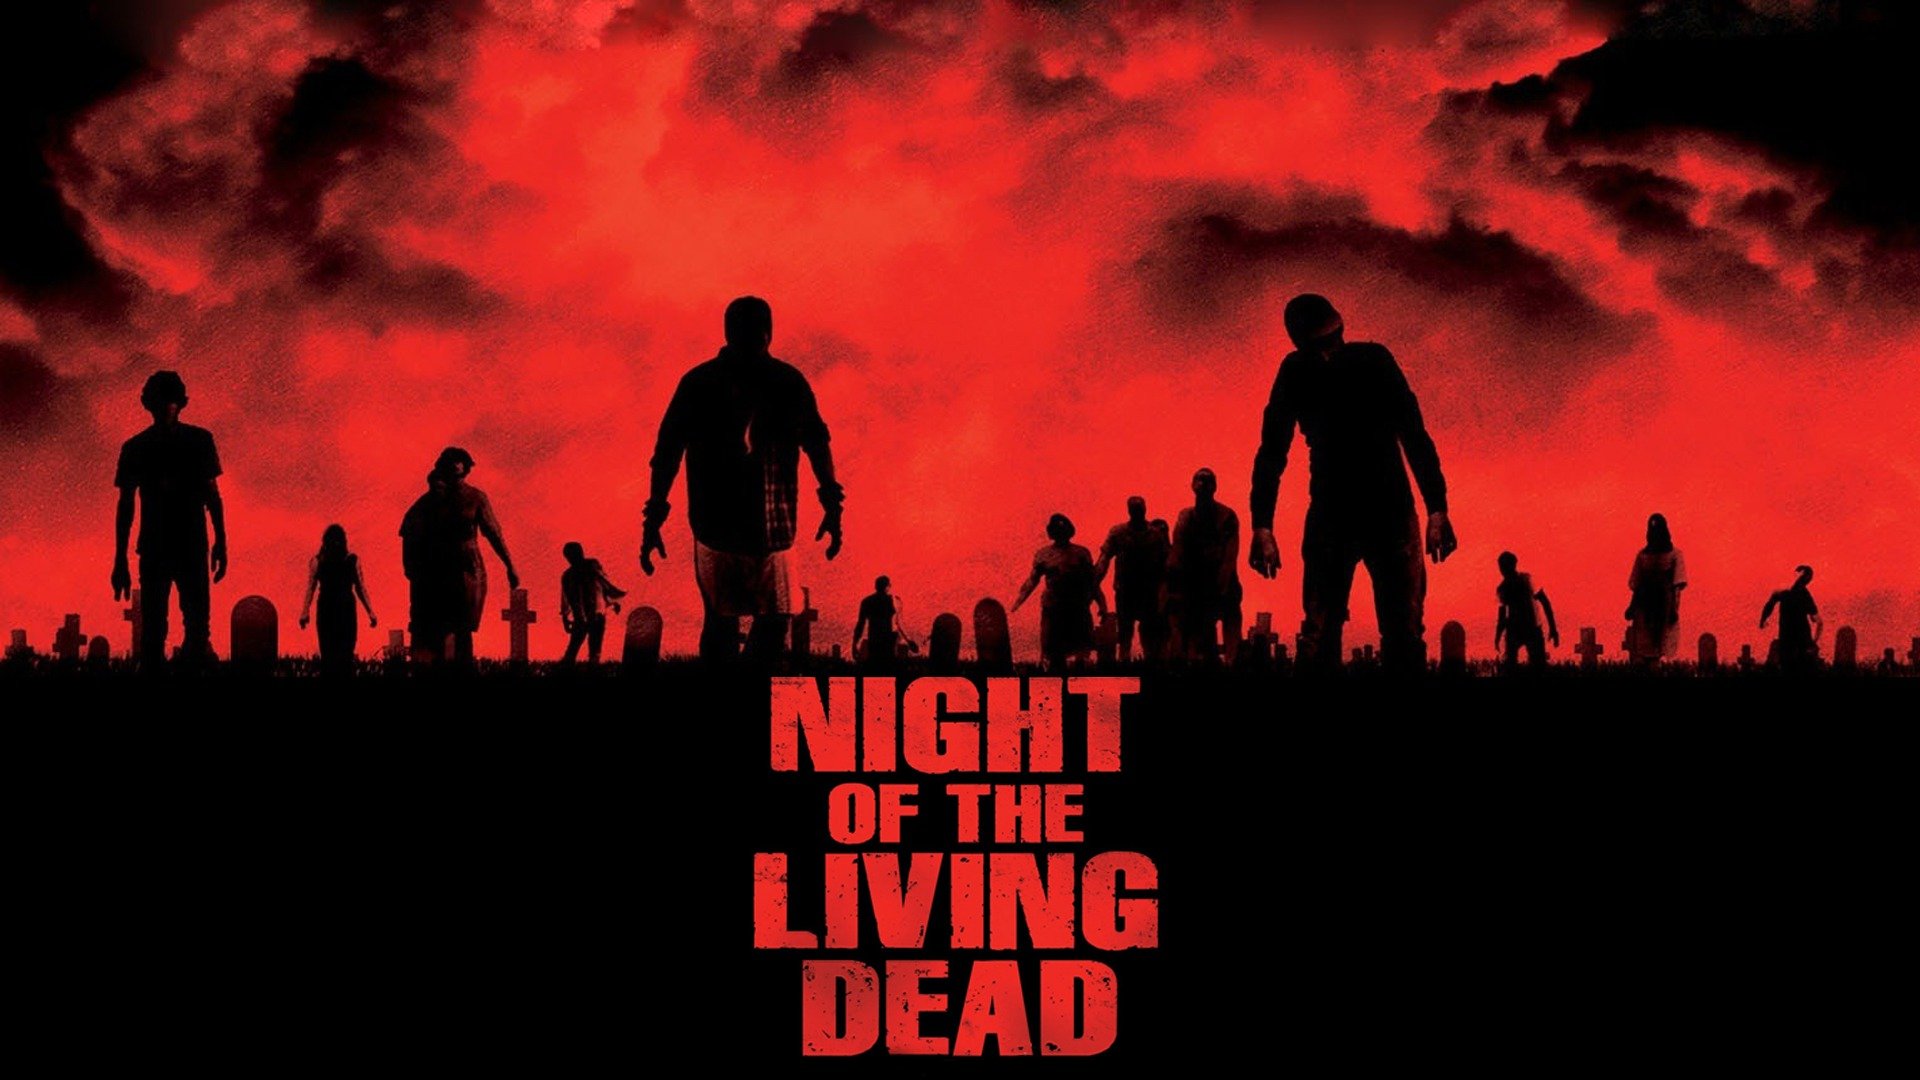 38-facts-about-the-movie-night-of-the-living-dead